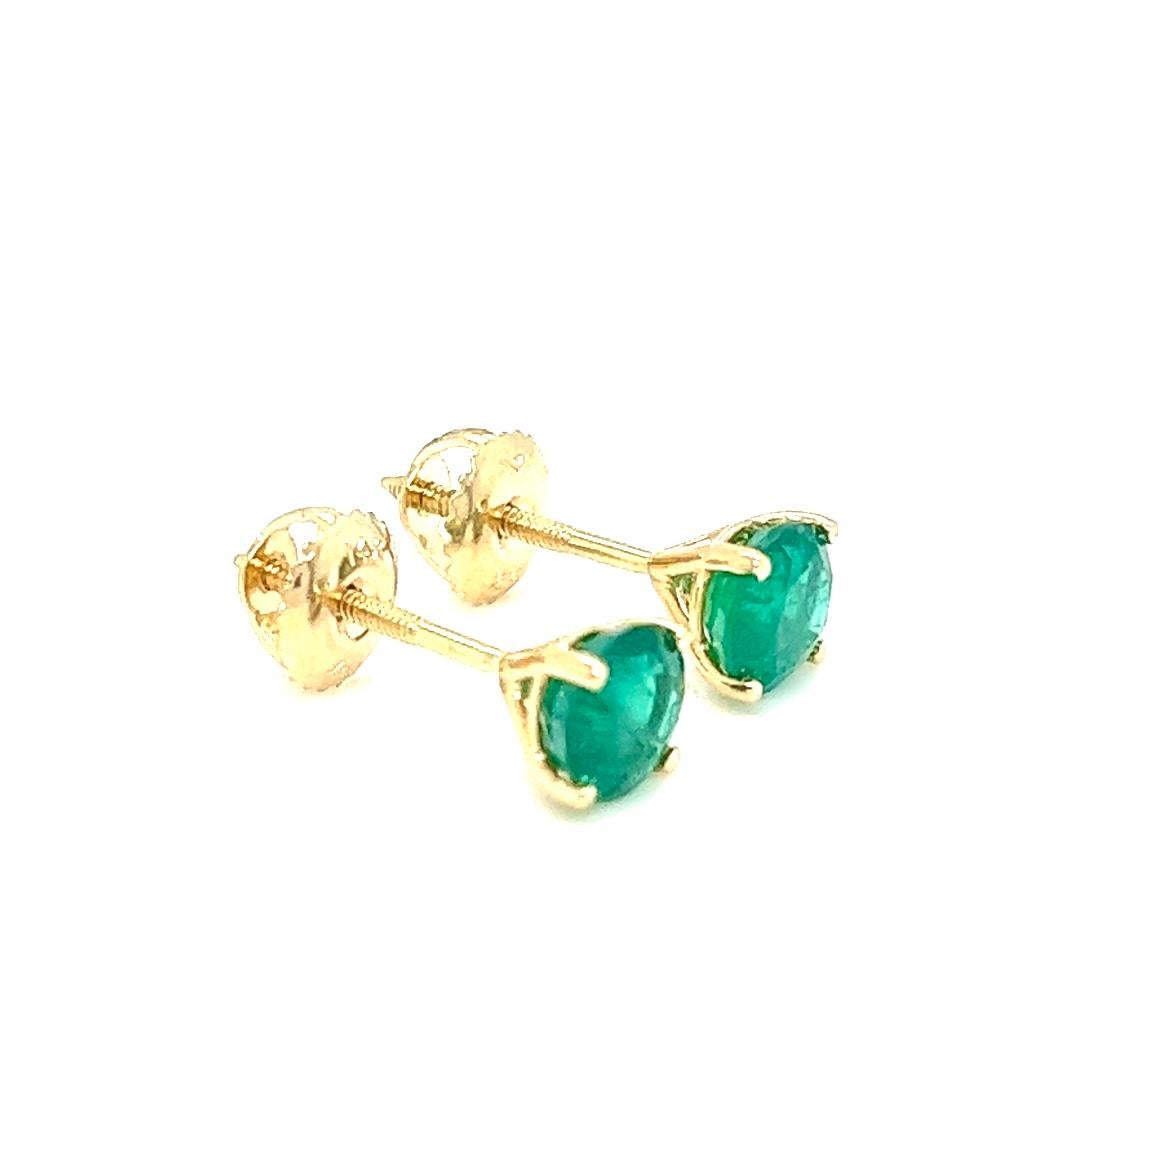 Women's or Men's 1.31 carats round Emerald Stud Earrings in 14K Yellow Gold. For Sale